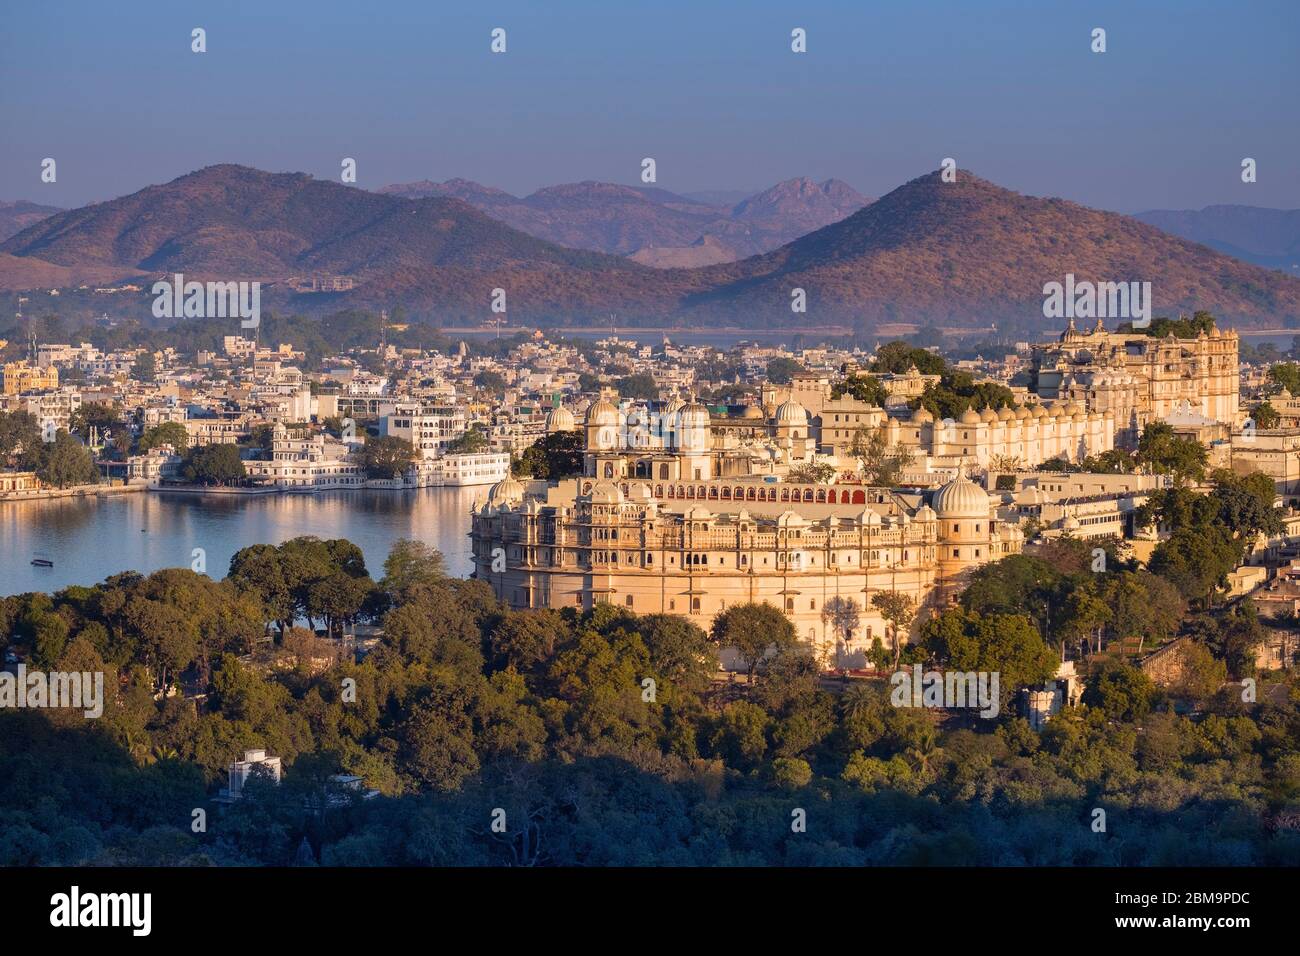 View to City Palace Udaipur Rajasthan India Stock Photo